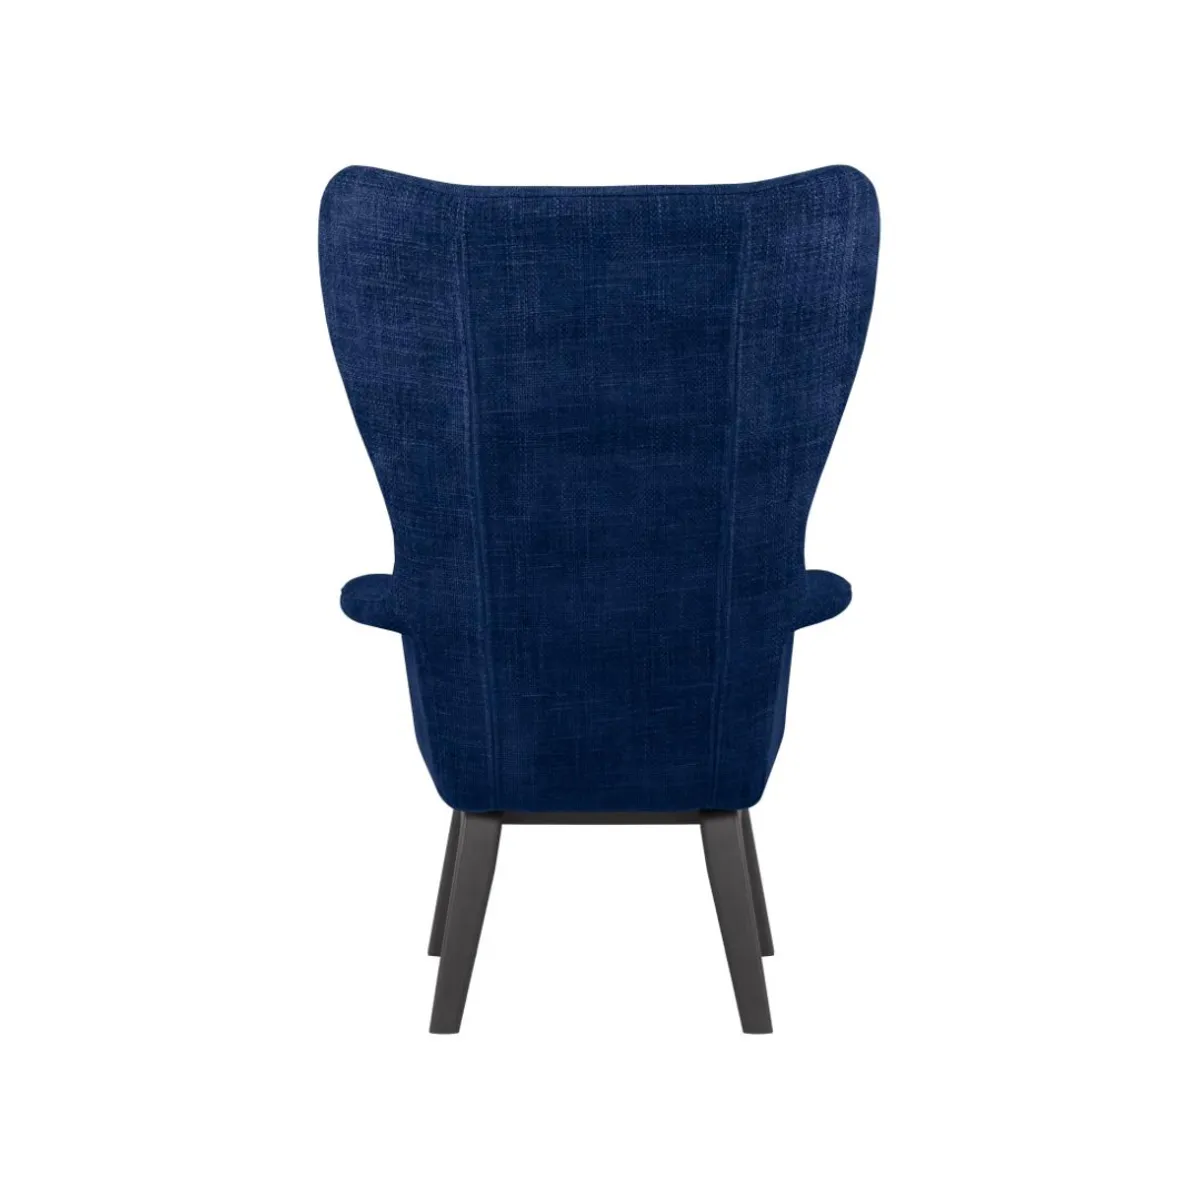 Avery wing back chair 4